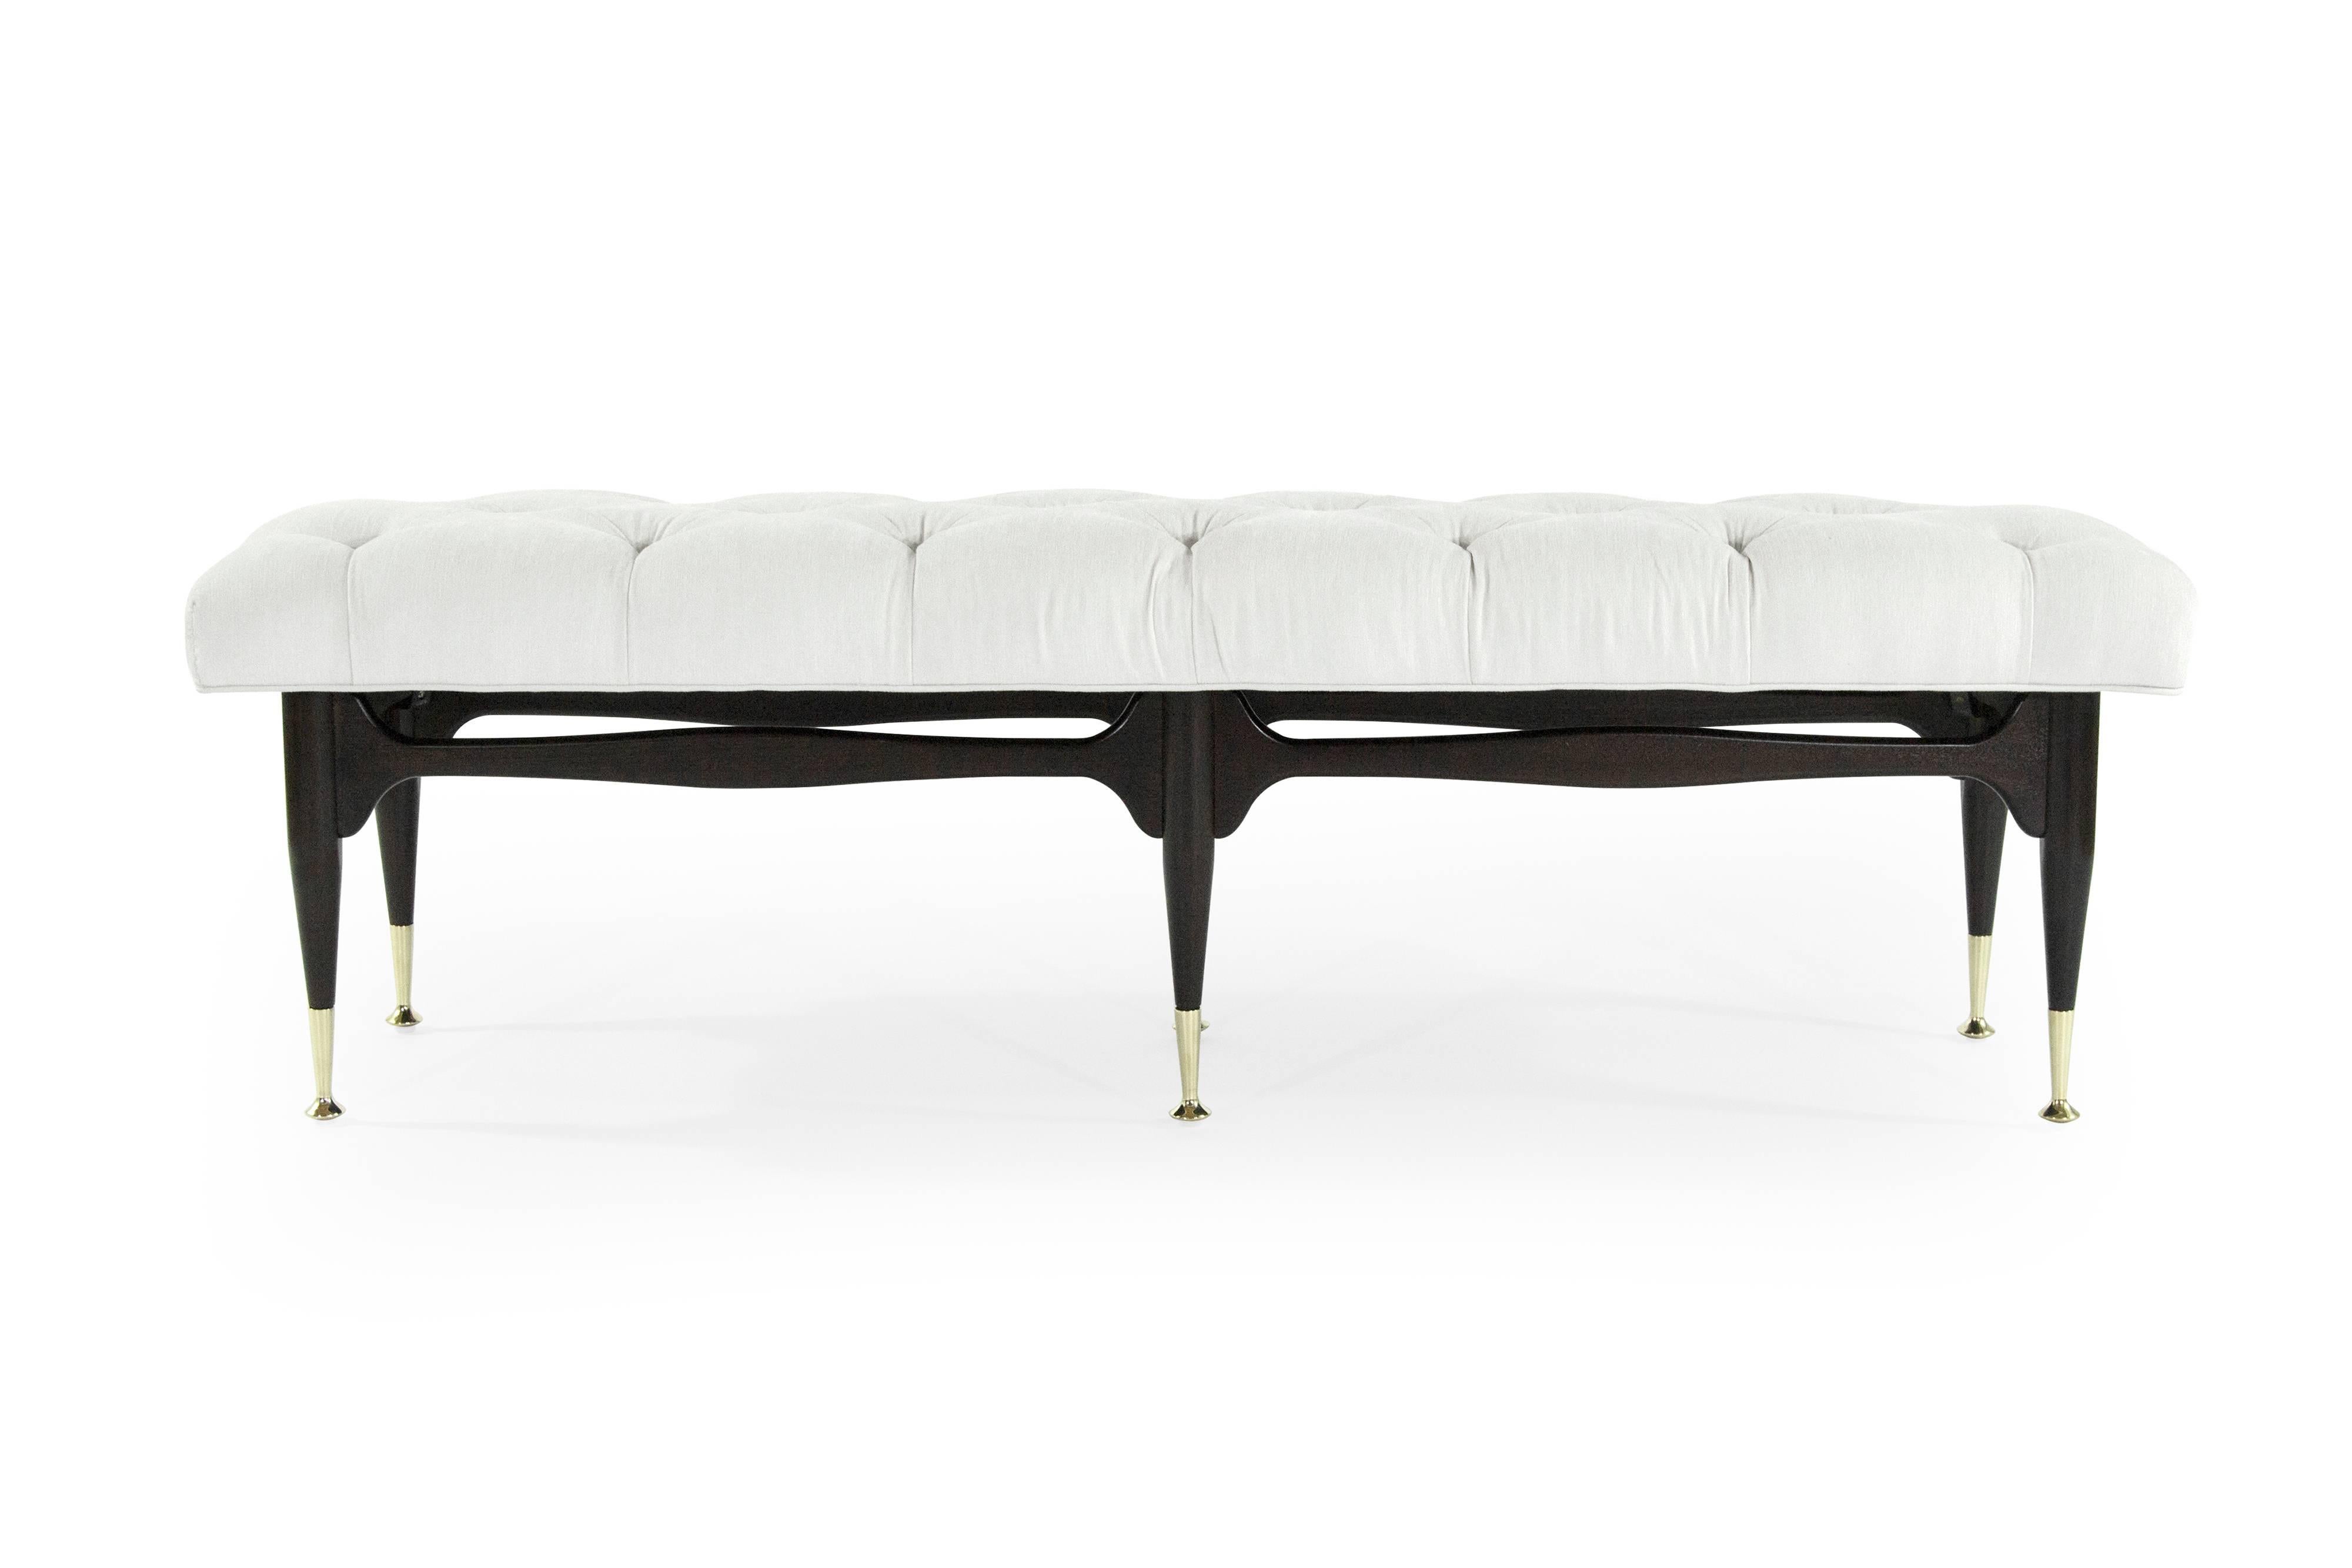 Mid-Century Modern sculpted mahogany bench in the style of Gio Ponti, wood has been fully restored to its original espresso finish. Newly upholstered in off-white cotton linen with tufting detail. Brass sabots newly polished.